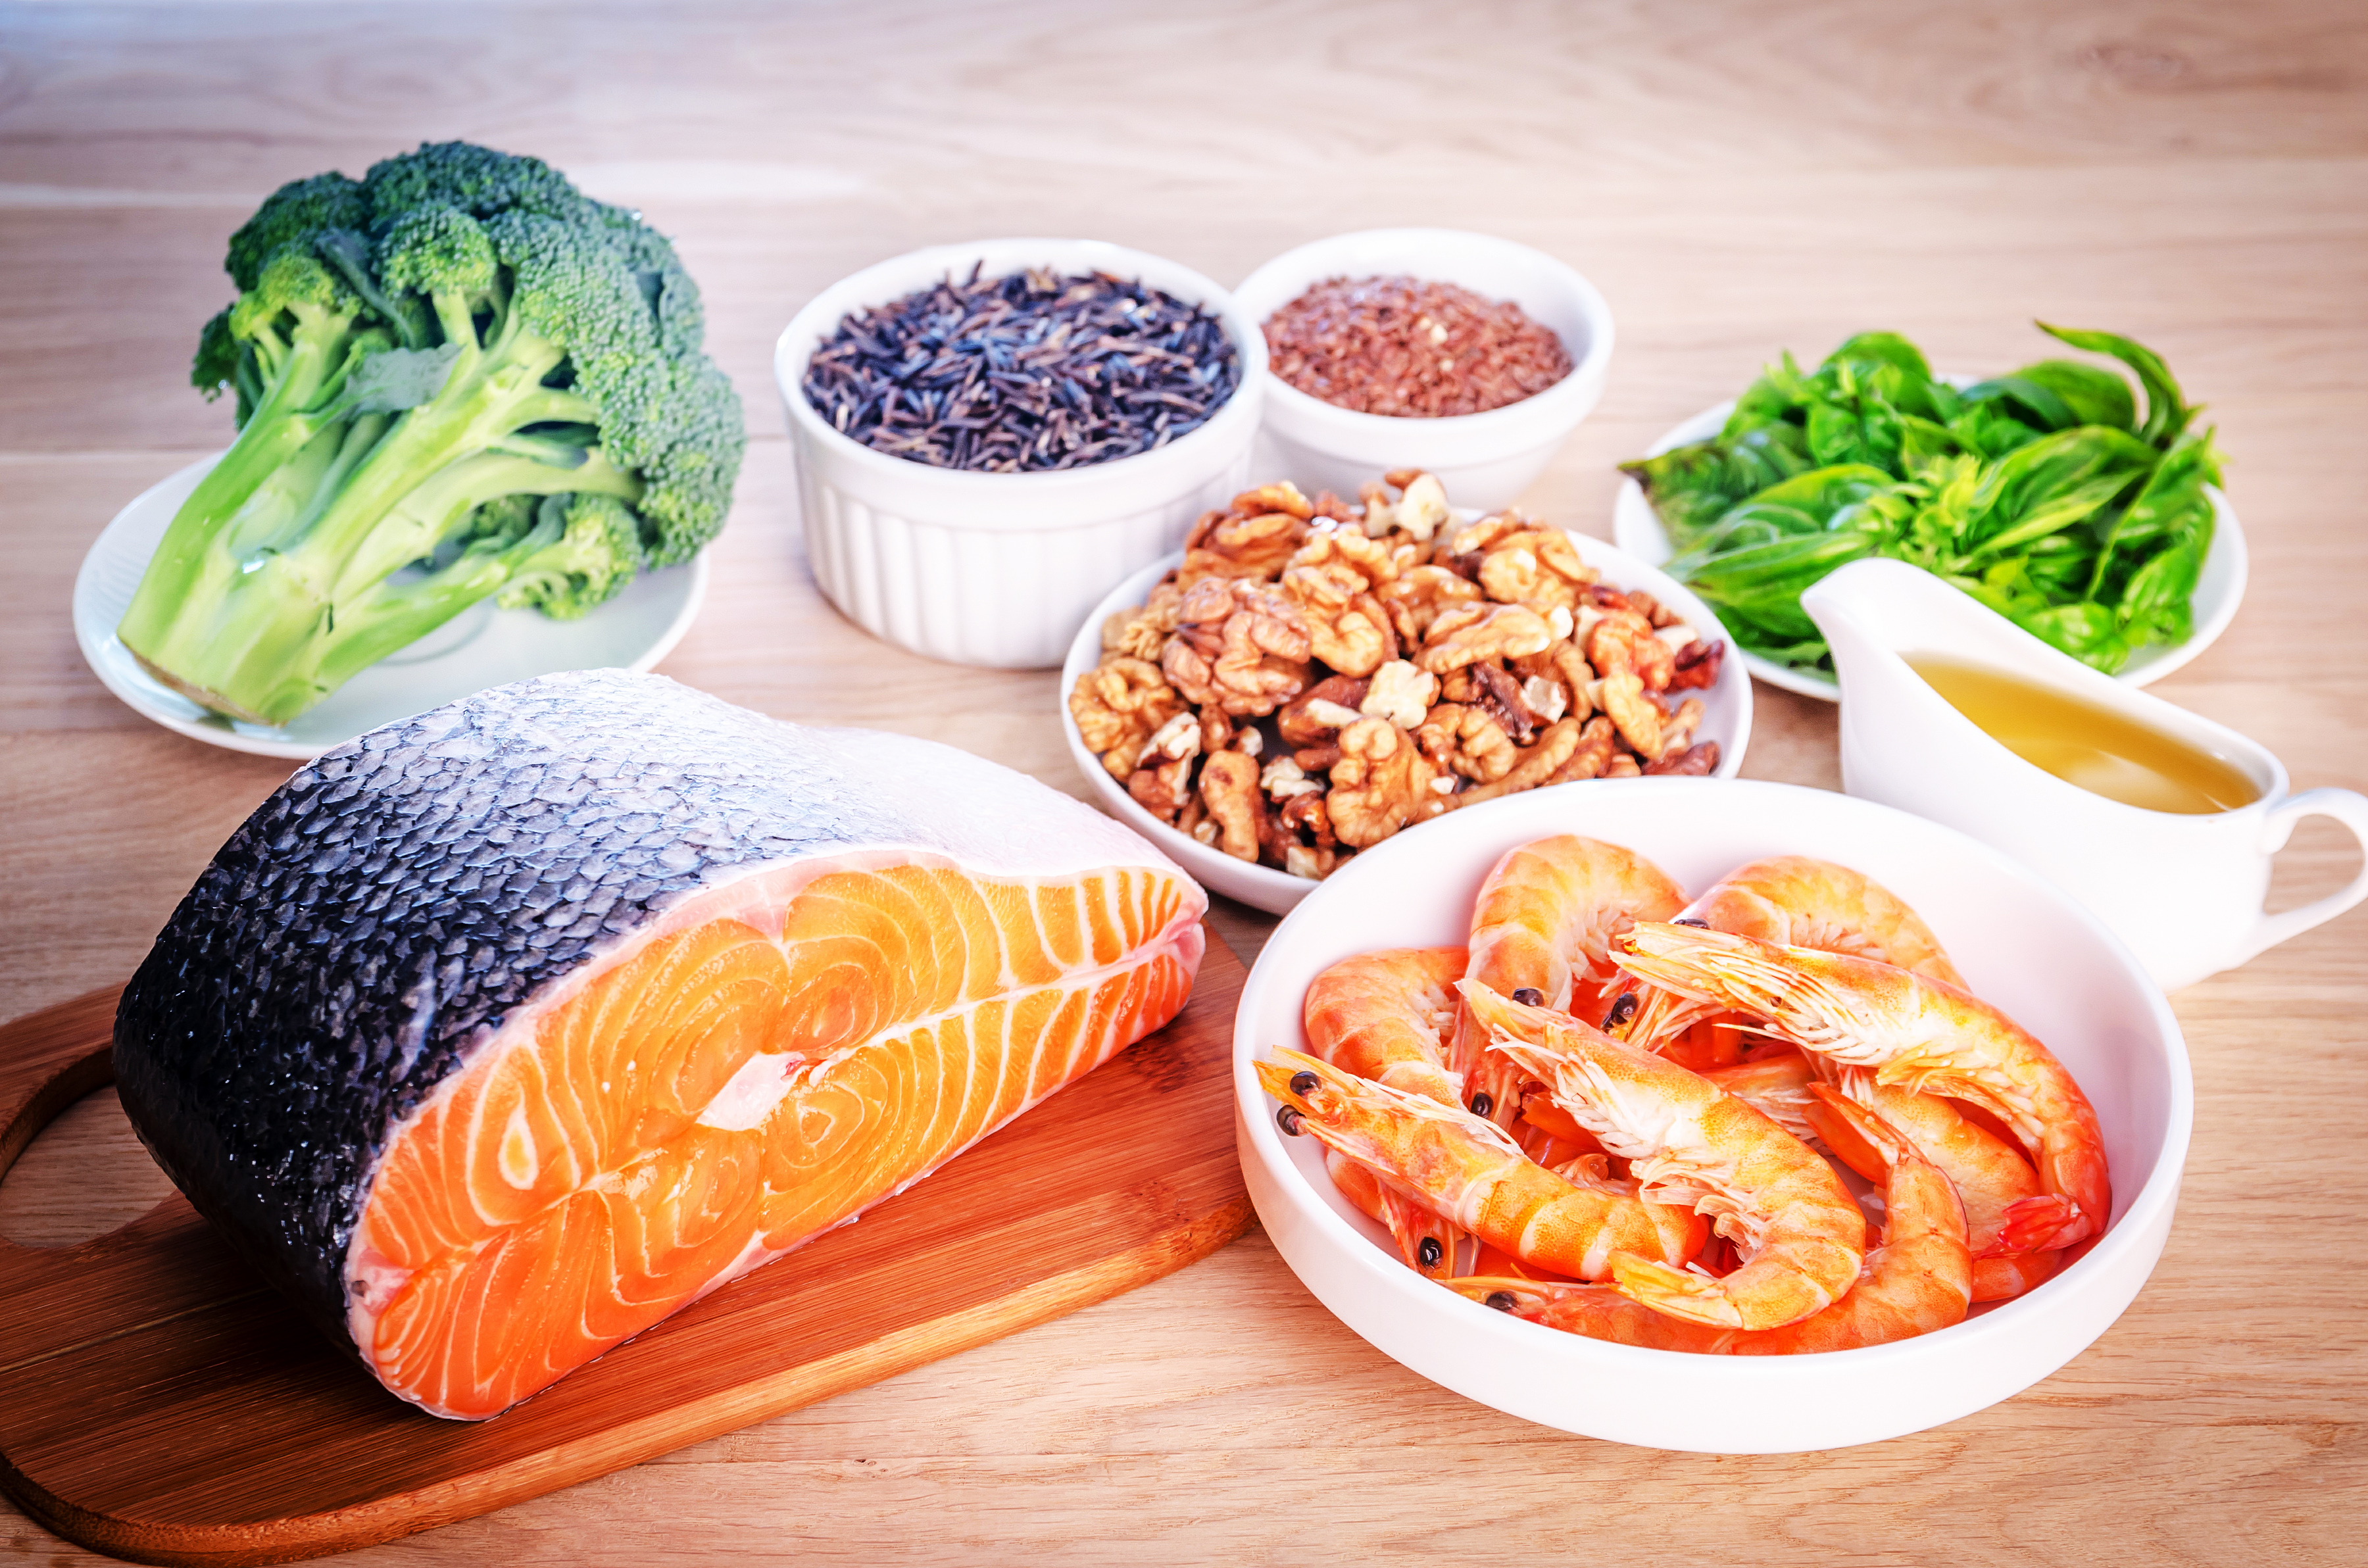 Plant-based and animal sources of Omega-3 acids